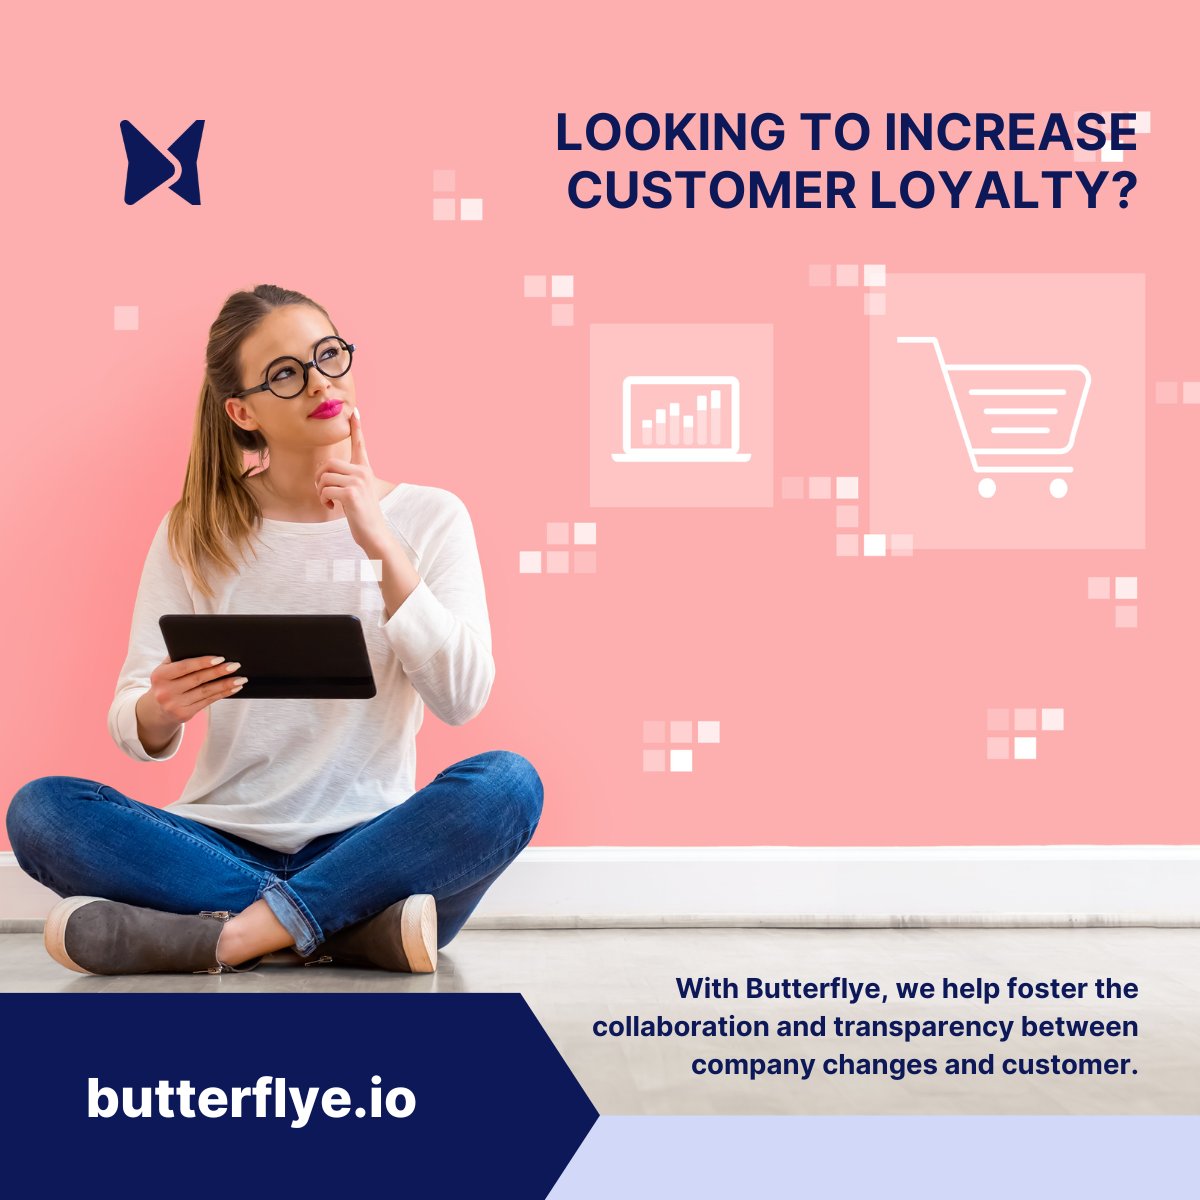 👀 LOOK No Further!
Learn even more at butterflye.io

#productannouncement #appsumo #butterflyesolutions #customerfeedback #roadmap #engagecustomers #productmanager #changelog